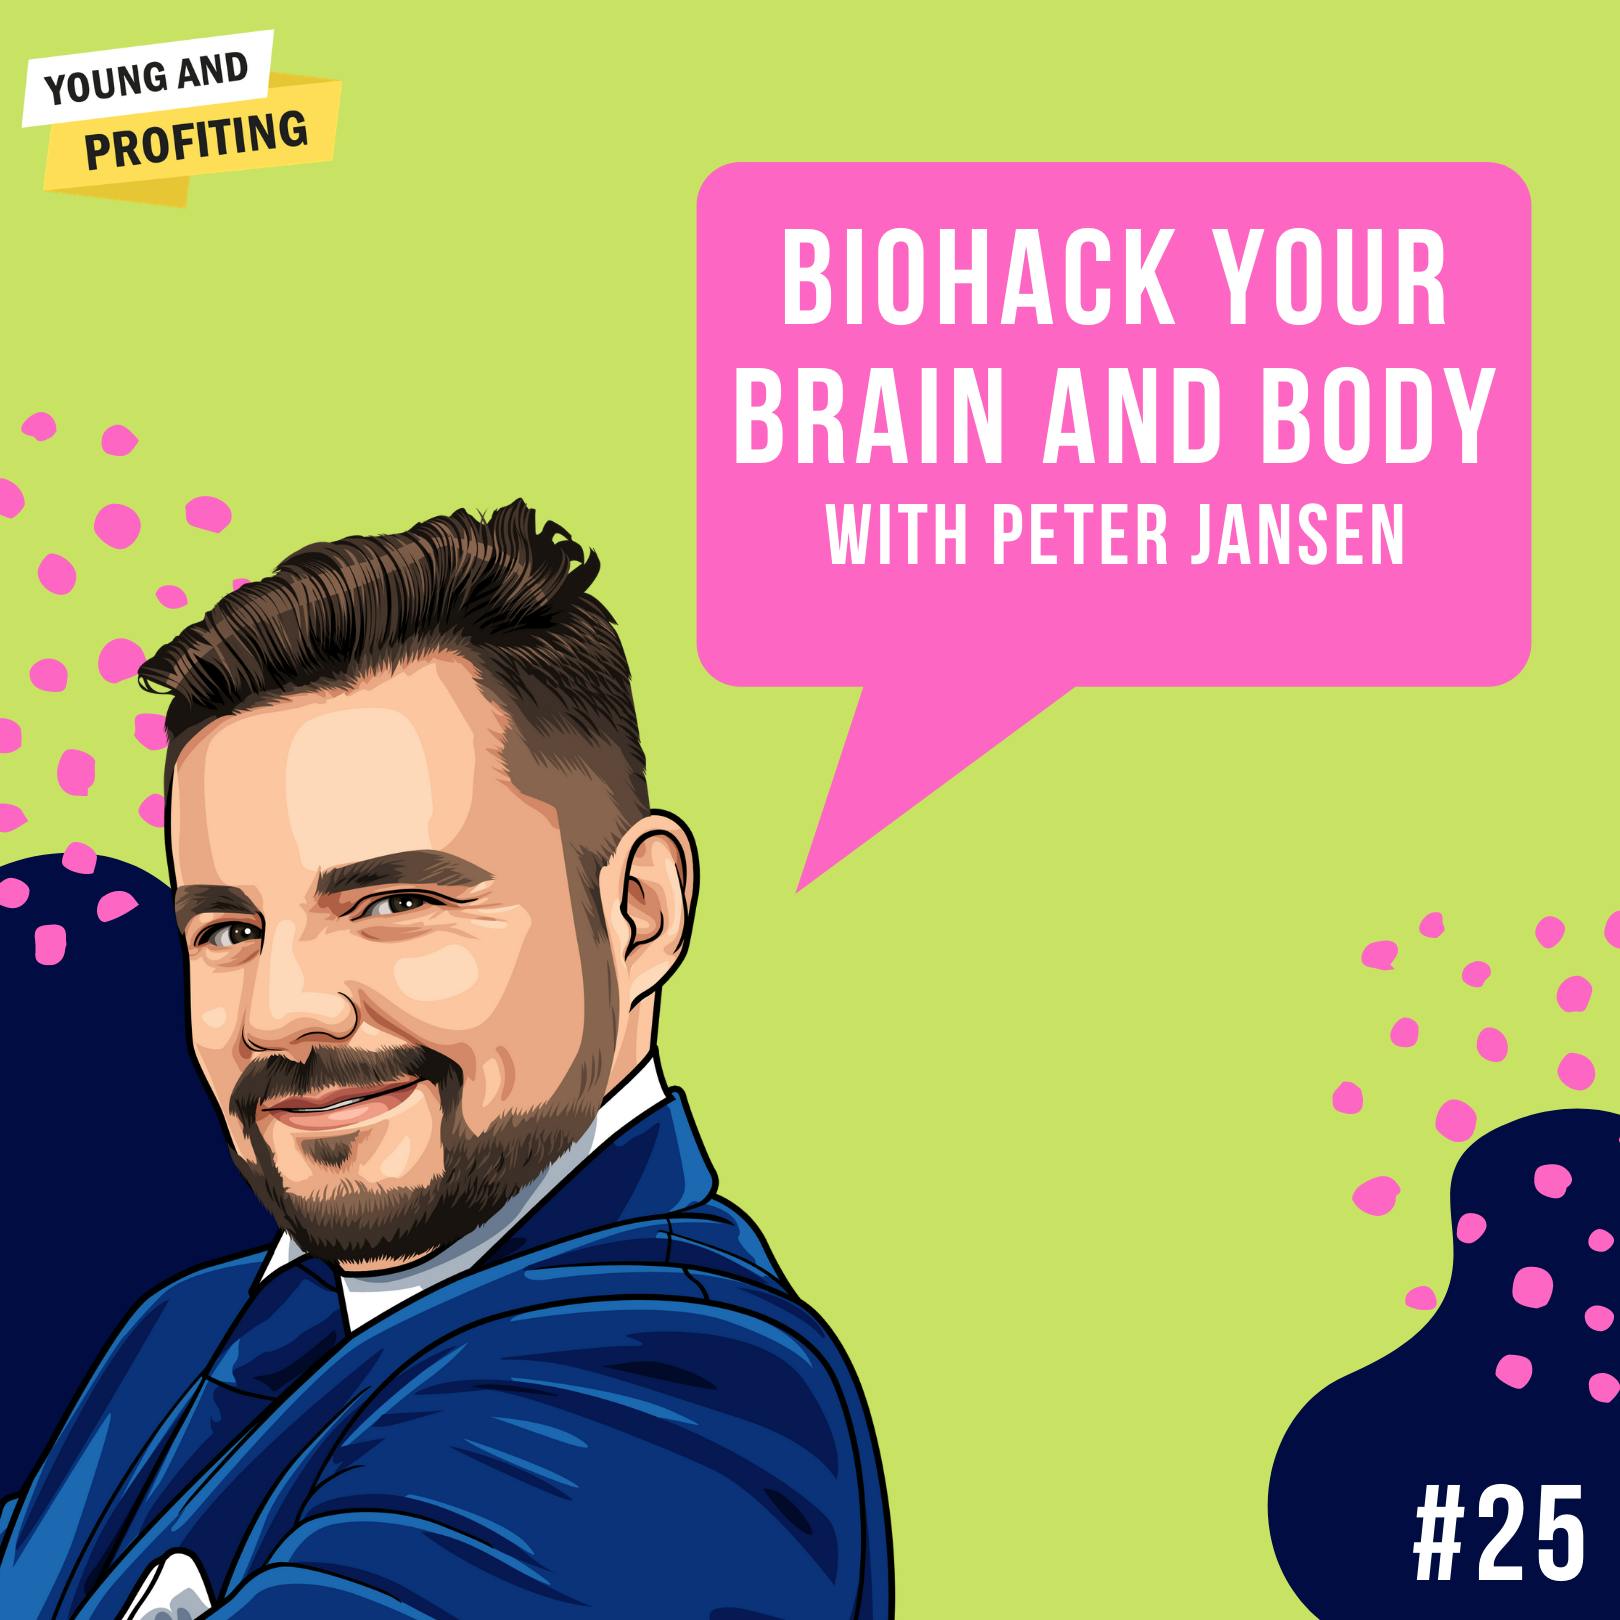 Peter Jansen: Biohacking Your Brain and Body | E25 by Hala Taha | YAP Media Network